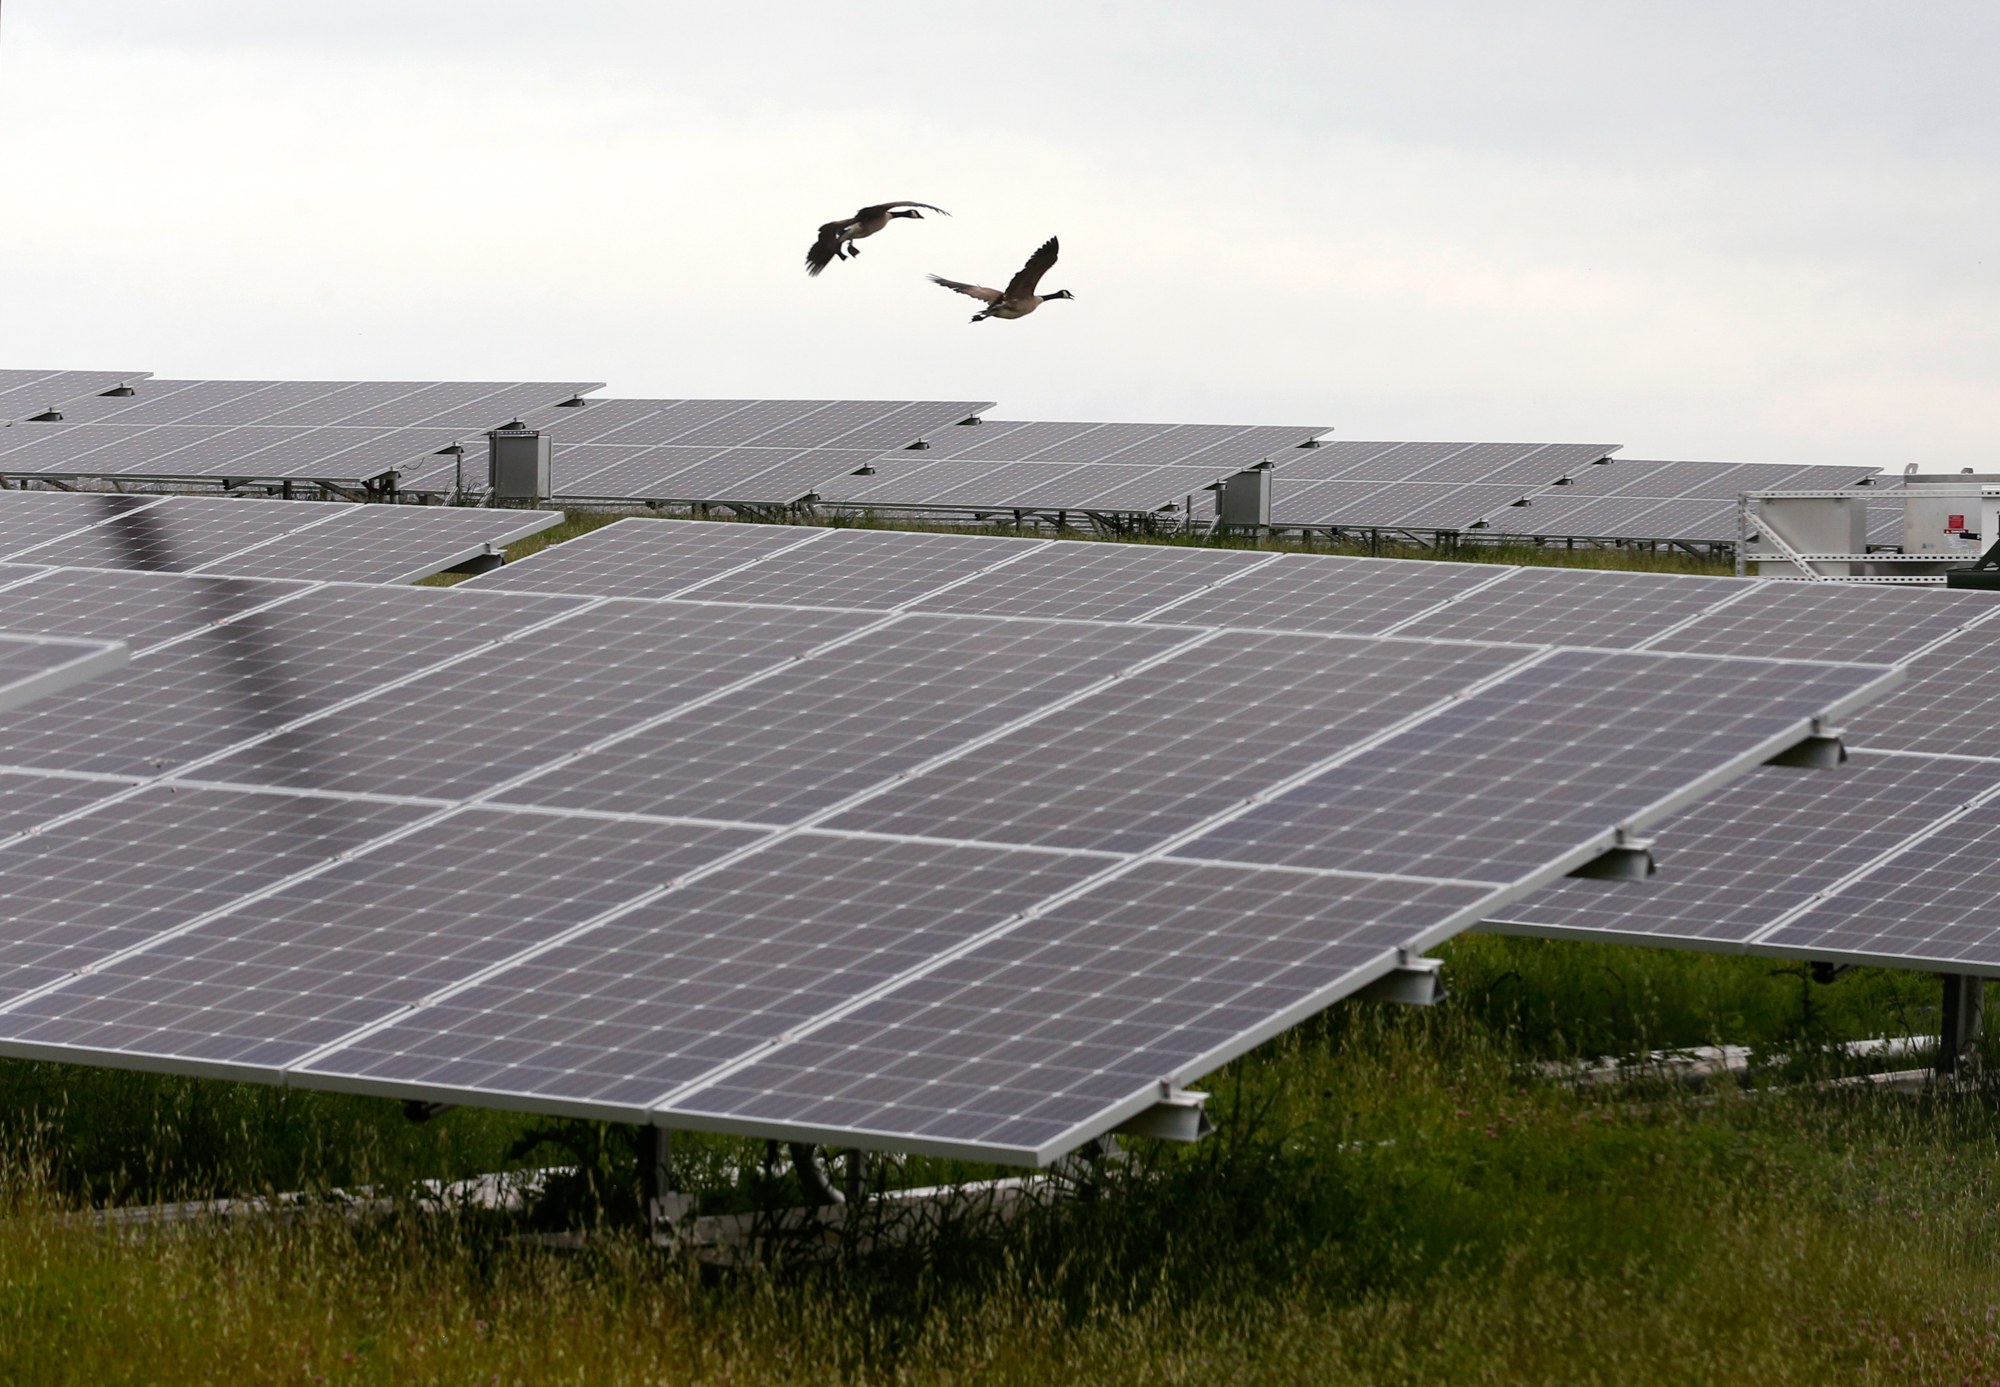 A pair of geese descend into a field of solar panels.